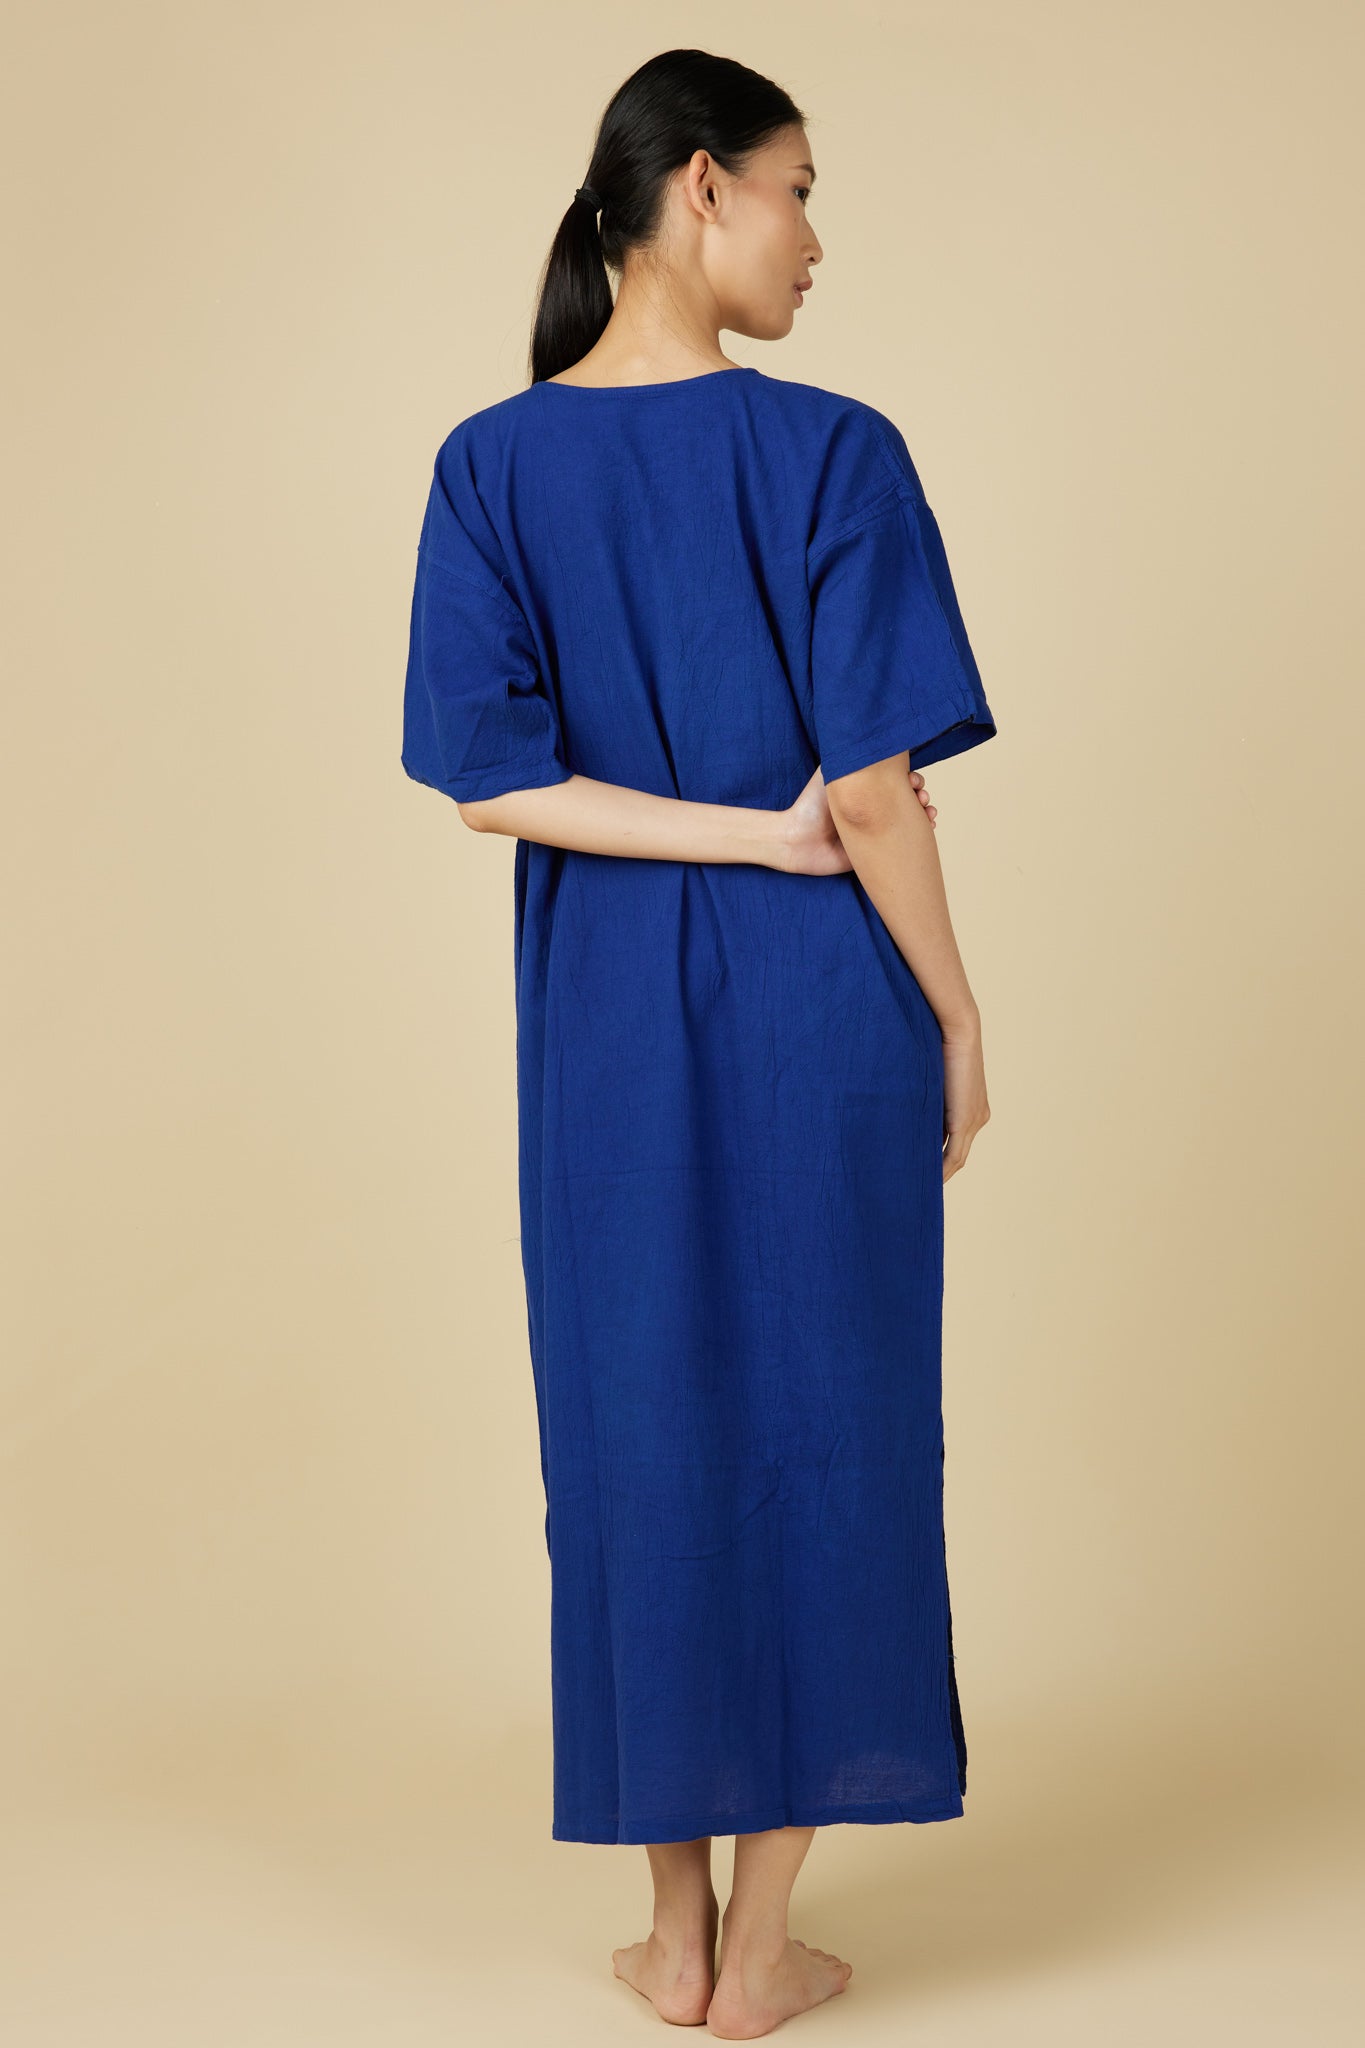 Hand Dyed Short Sleeve Dress in Royal Blue